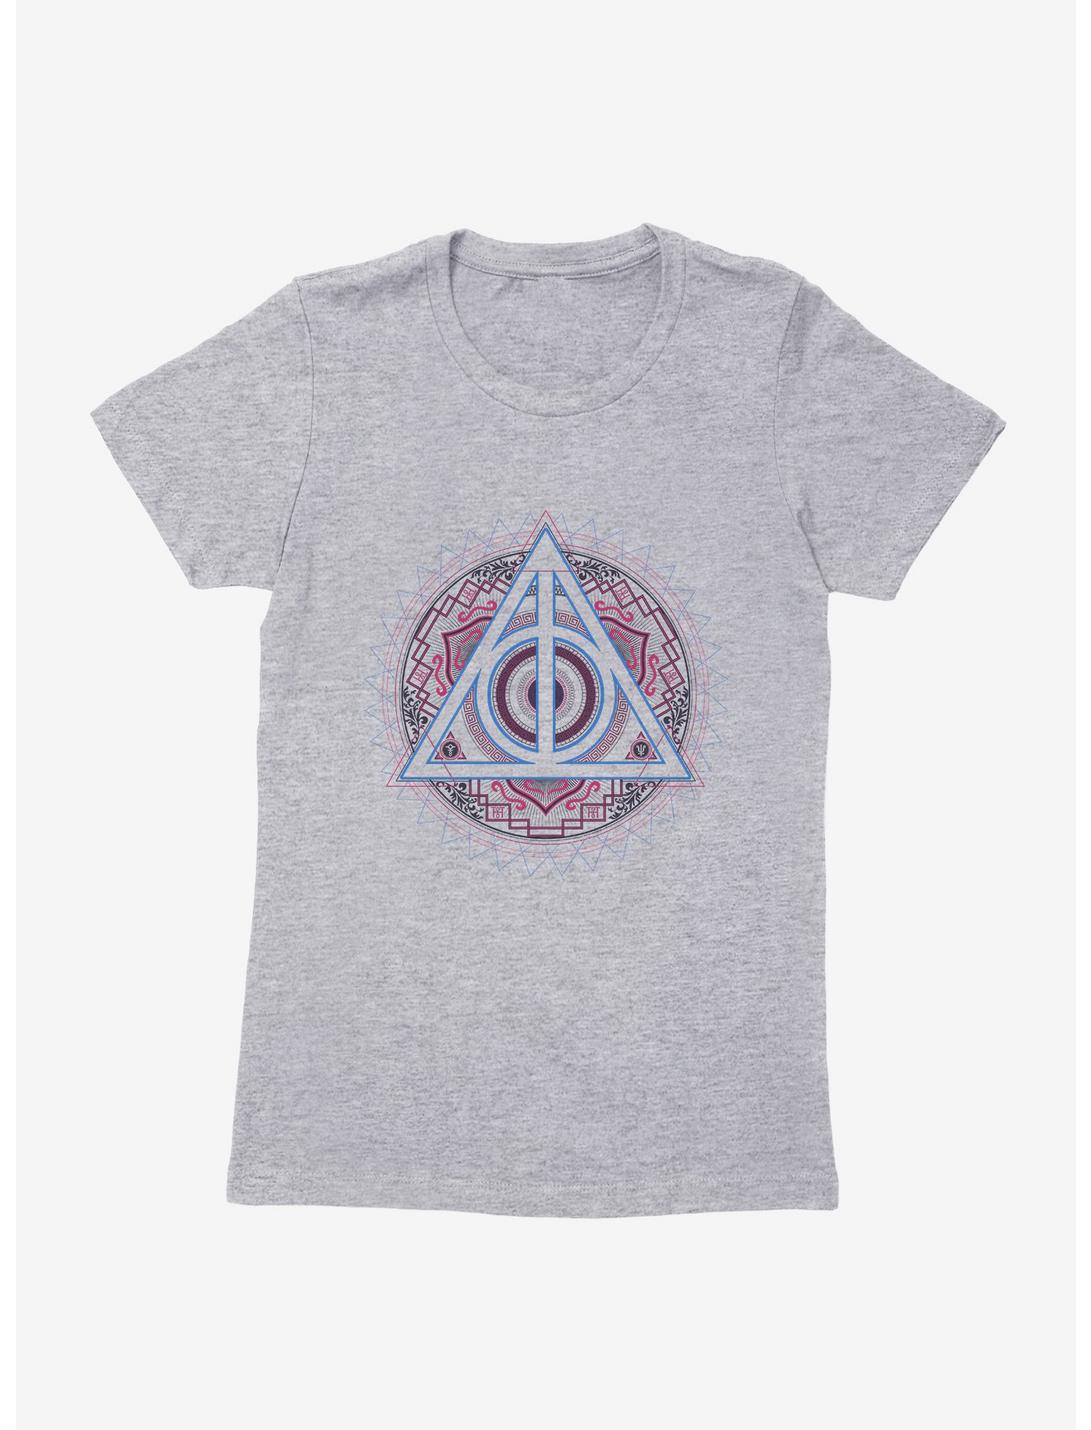 Harry Potter Deathly Hallows Symbol Decal Womens T-Shirt, HEATHER GREY, hi-res